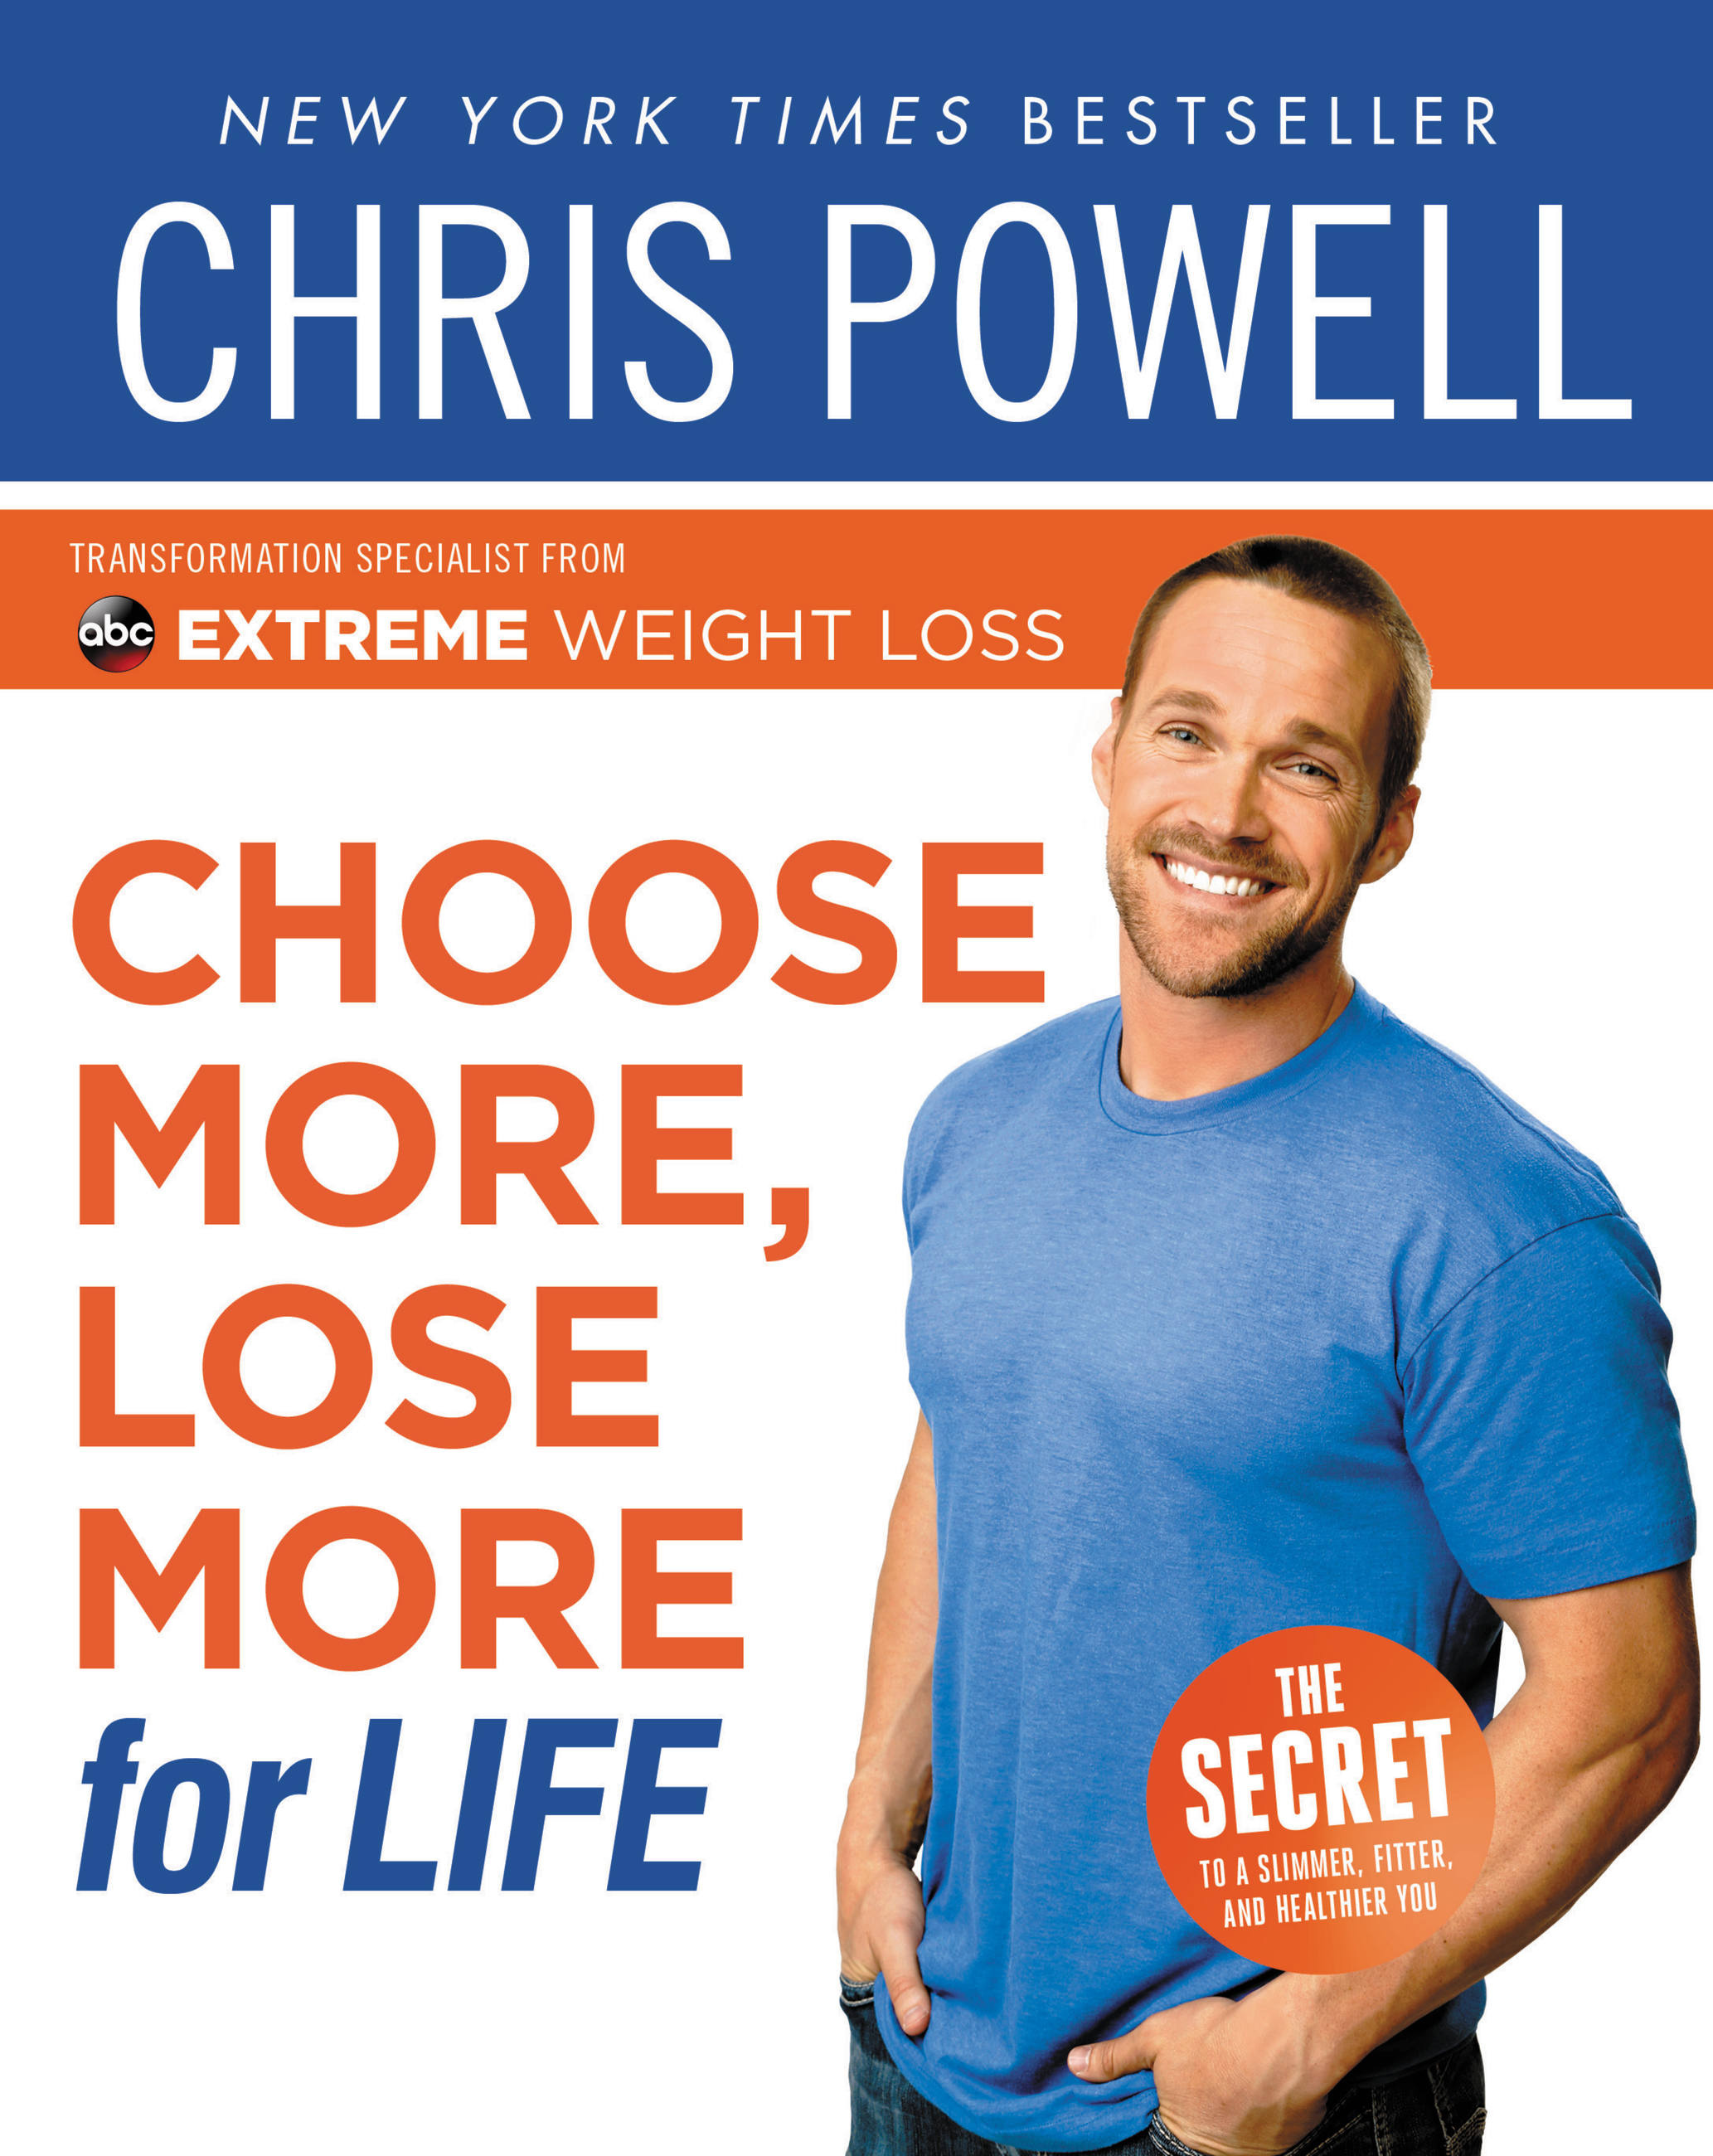 Chris Powell (personal Trainer). Lost more перевод